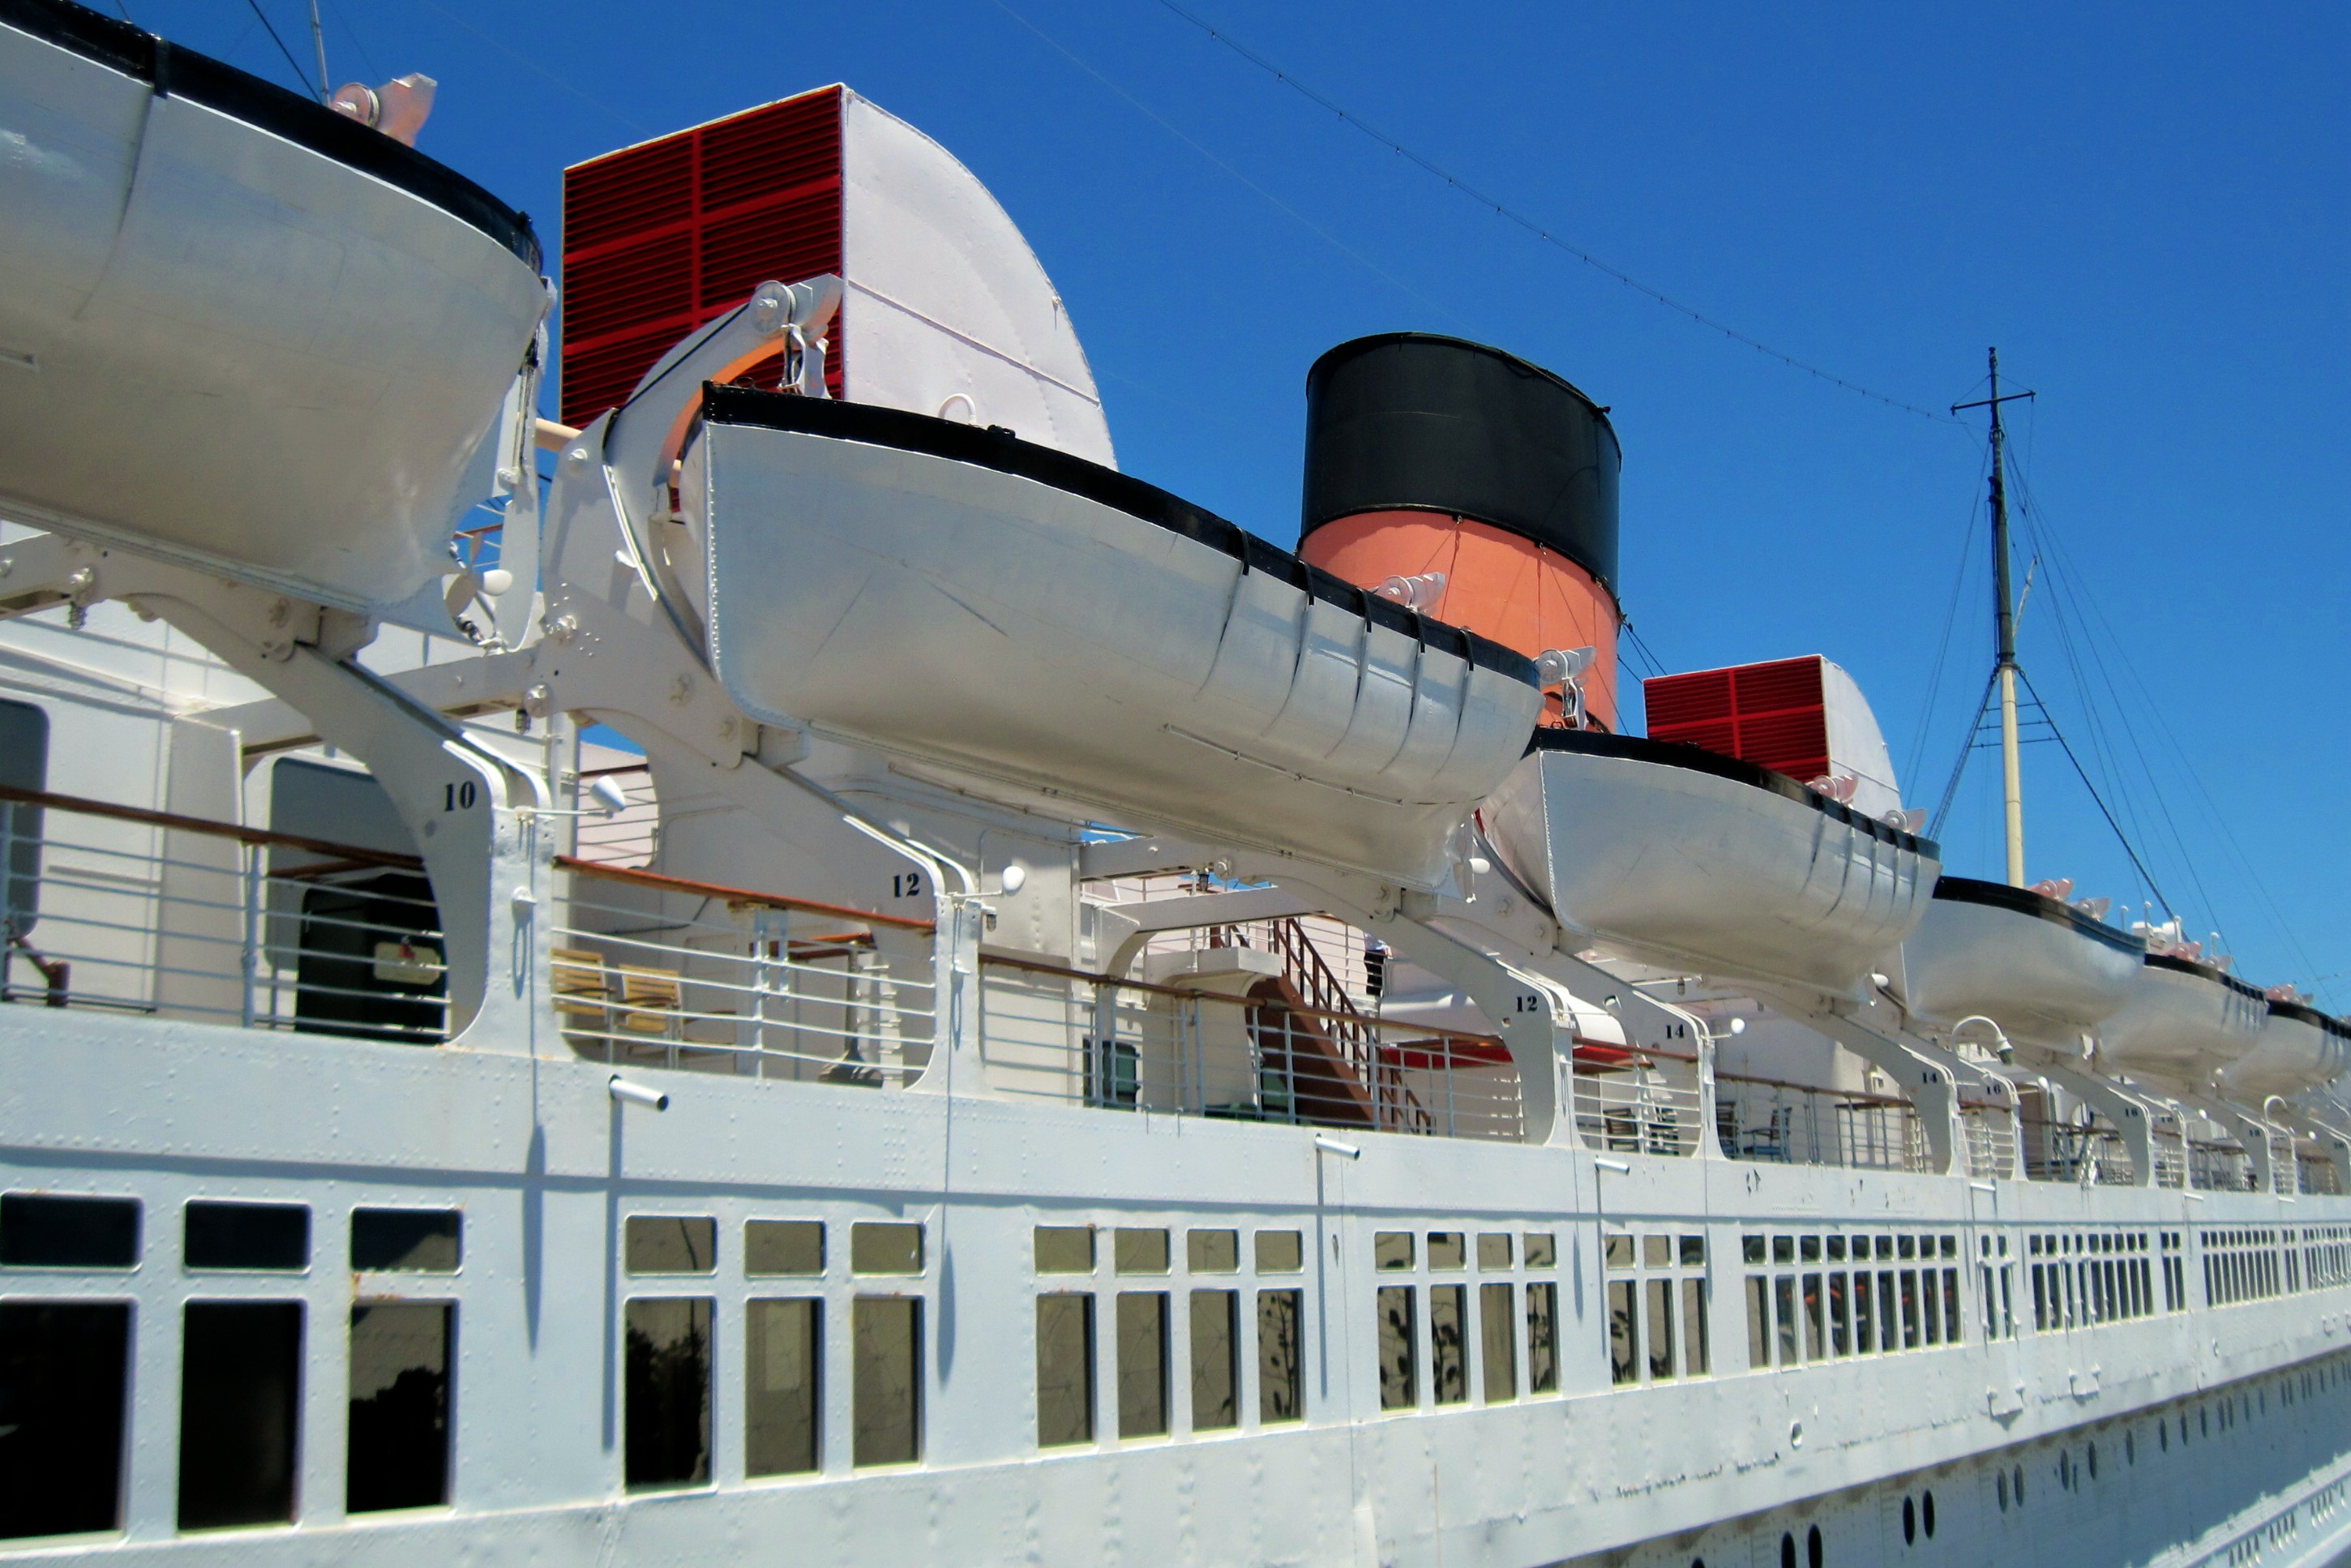 Queen Mary lifeboats and smoke stacks